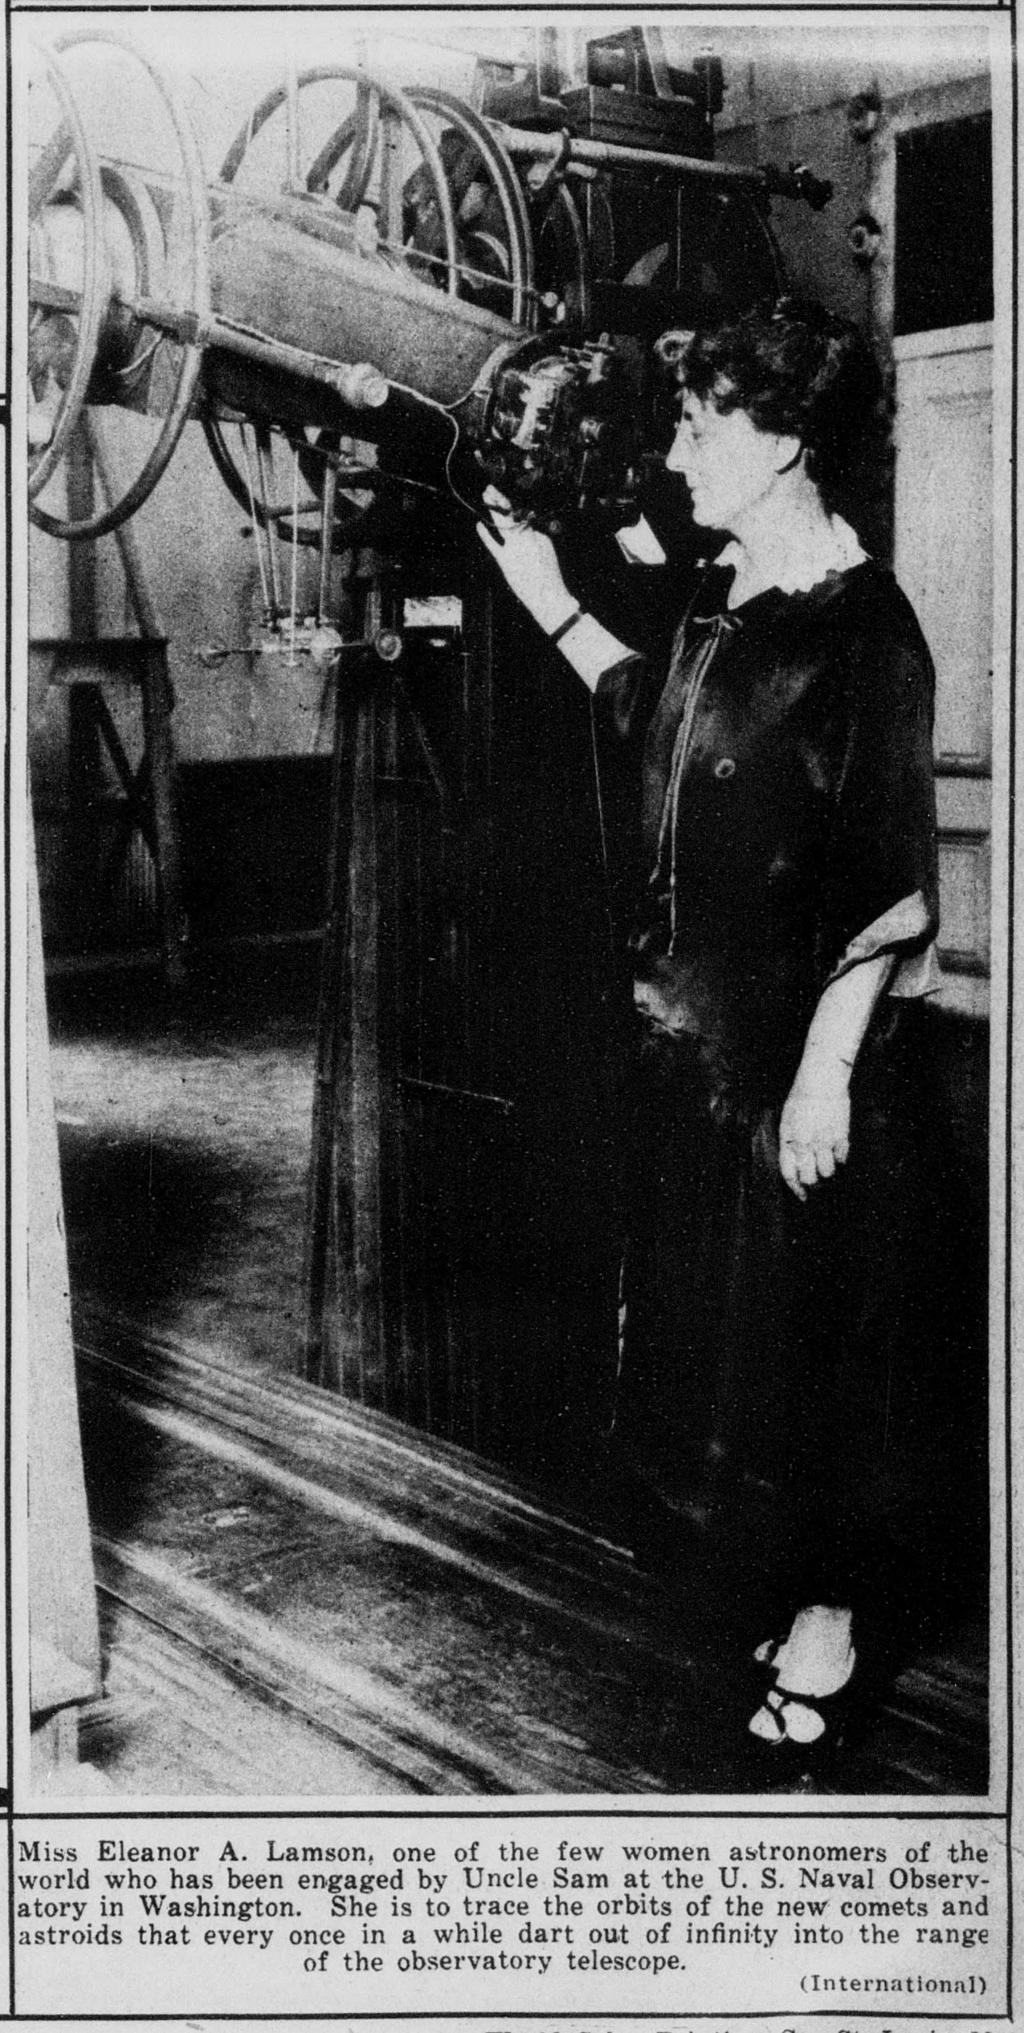 Black white and grey photograph cropped from a newspaper which shows Miss Eleanor A Lamson at the telescope of the U.S. Naval Observatory.